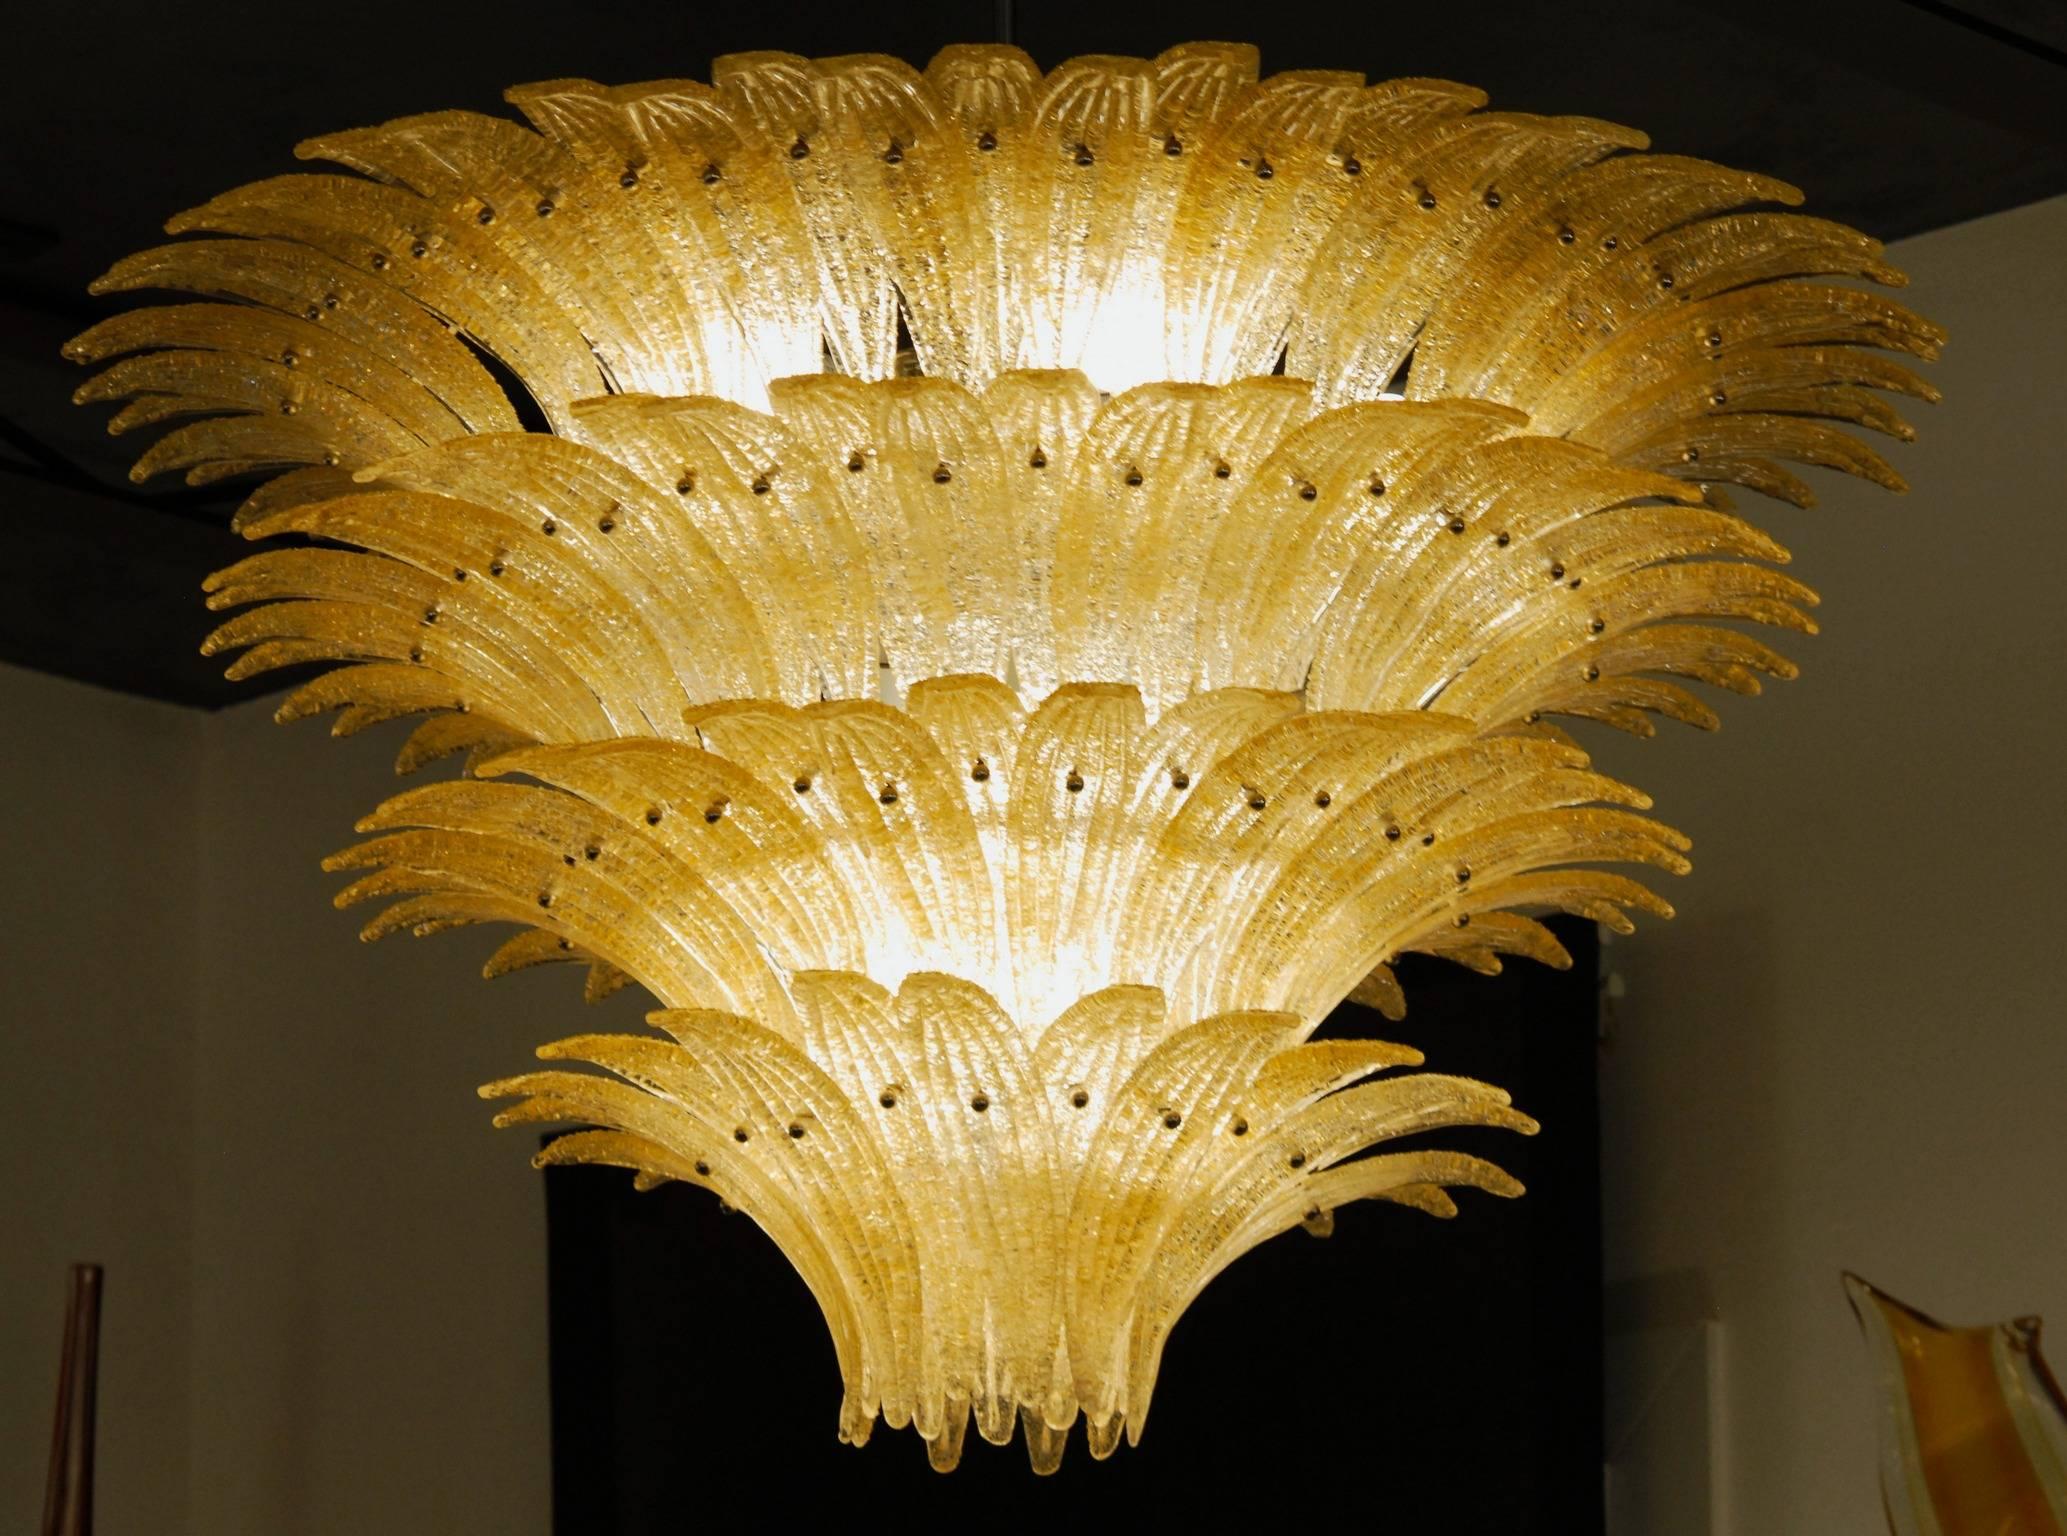 Monumental Midcentury Modern chandelier. For classic and eclectic homes and halls.

Would also be stunning in public places. The gold tone achieved with the amber application enriches an already beautiful design. The palm leaves are dense and cover